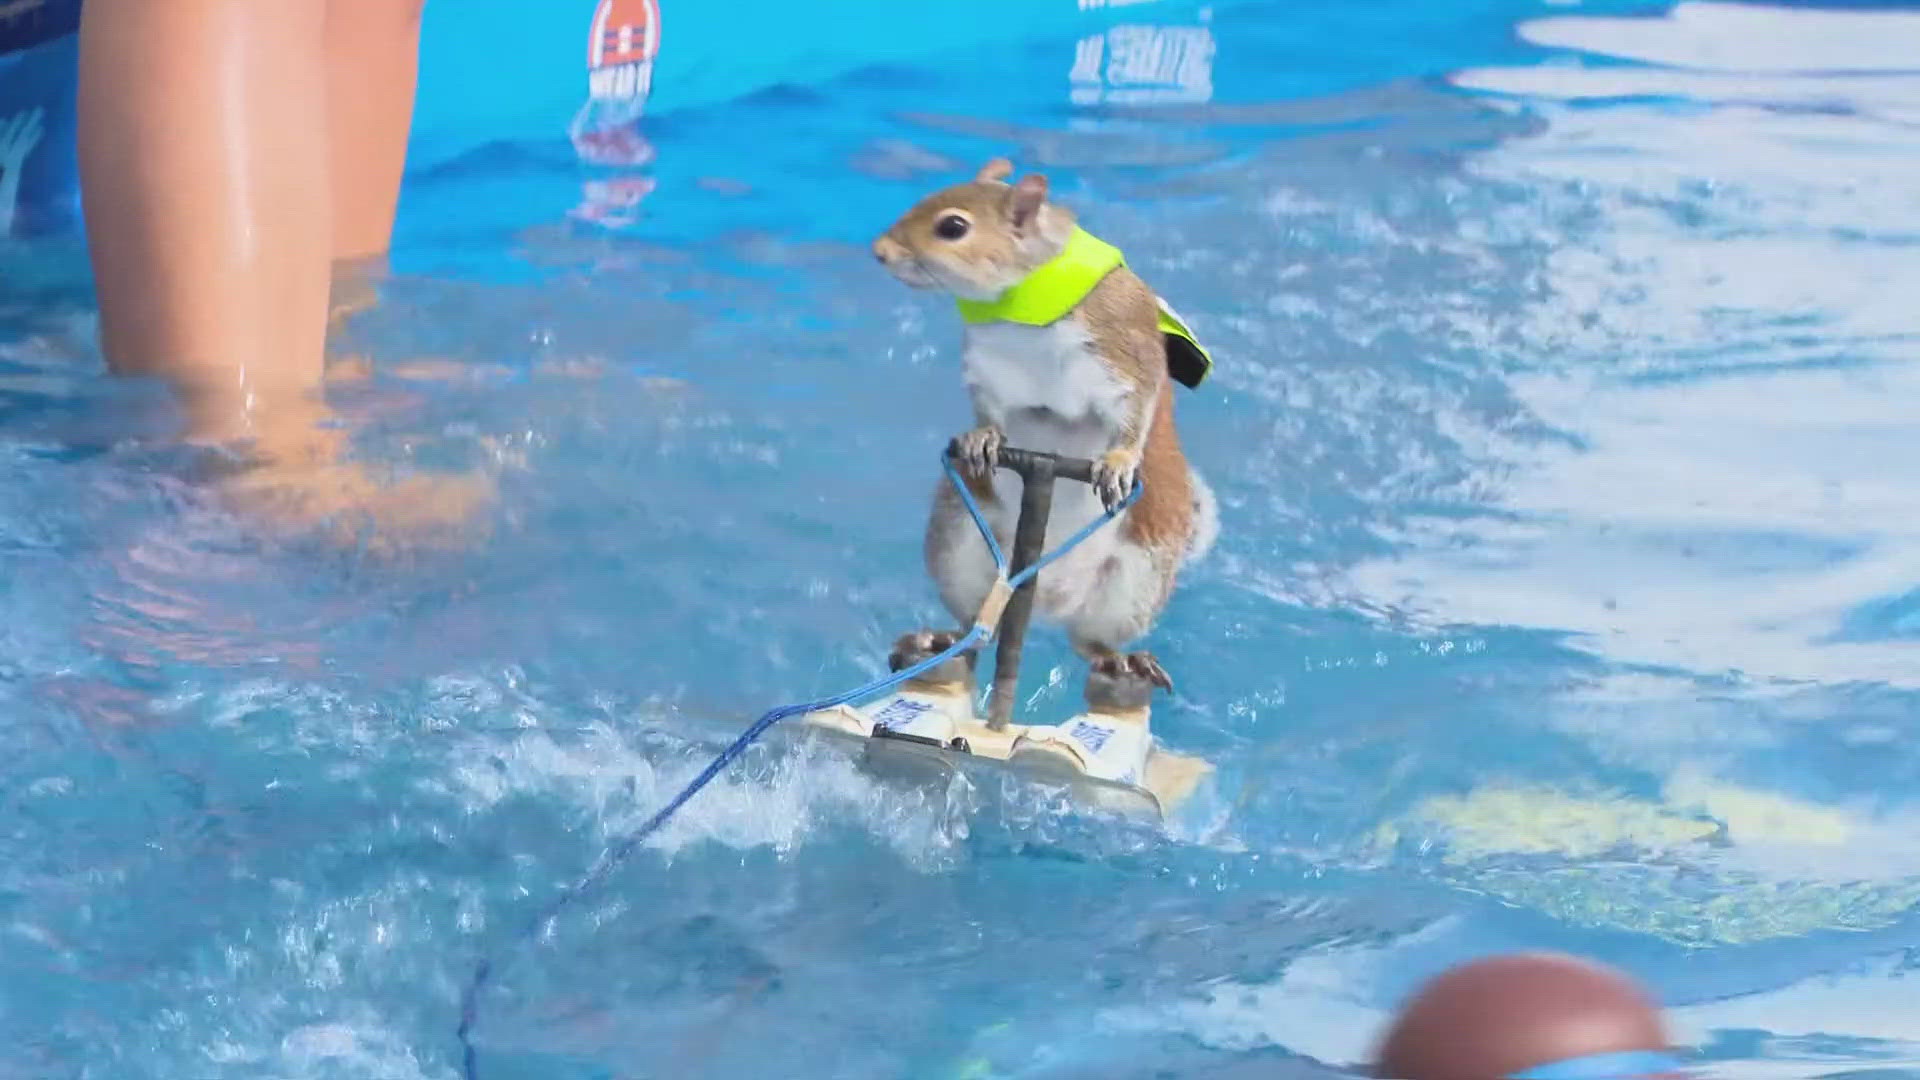 Visitors to the Marion County Fair can check out the show by "Twiggy," the world-famous water-skiing squirrel.